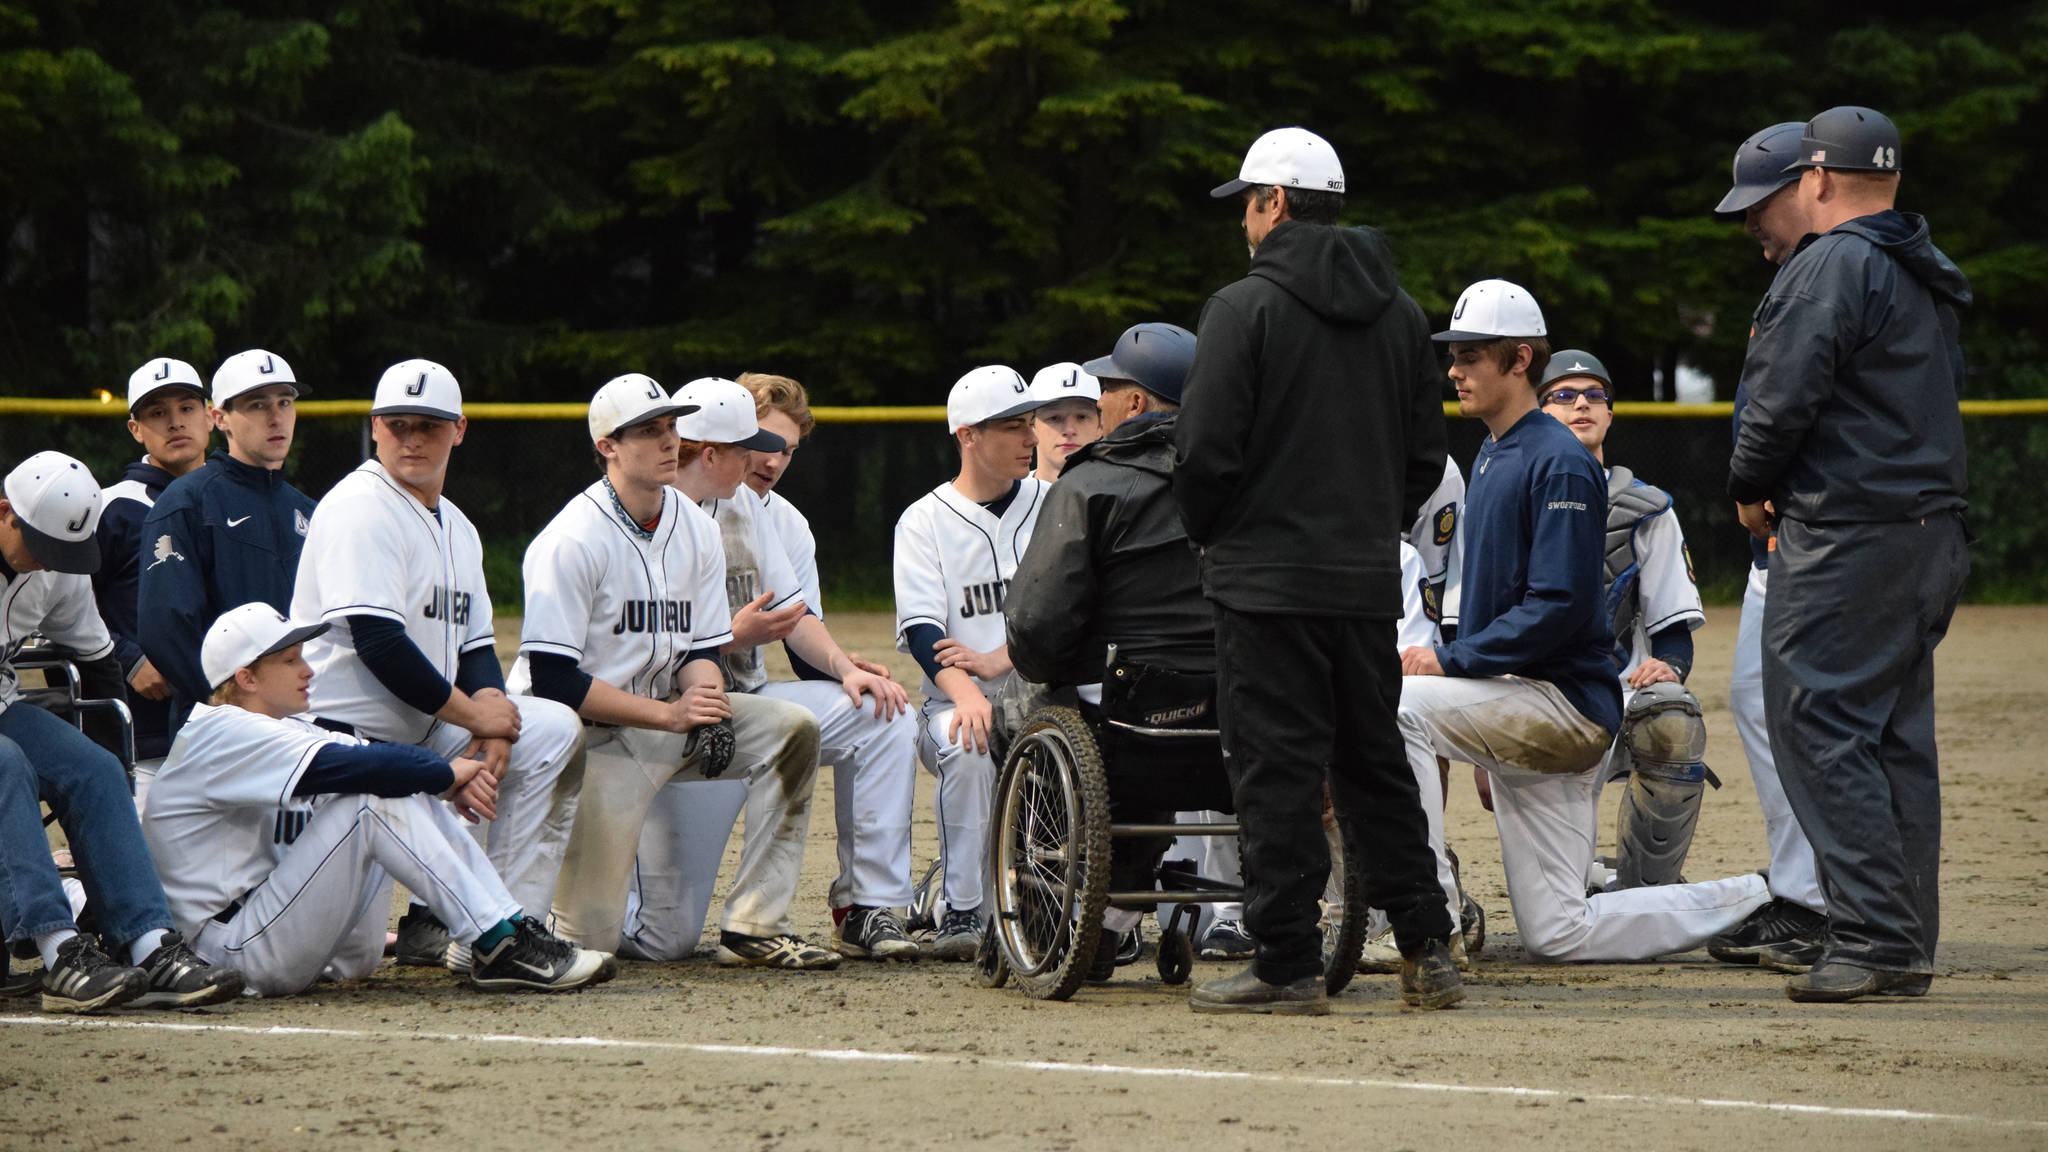 Juneau Post 25 is two games away from a state championship at the American Legion Baseball Tournament in Anchorage. (Nolin Ainsworth | Juneau Empire File)